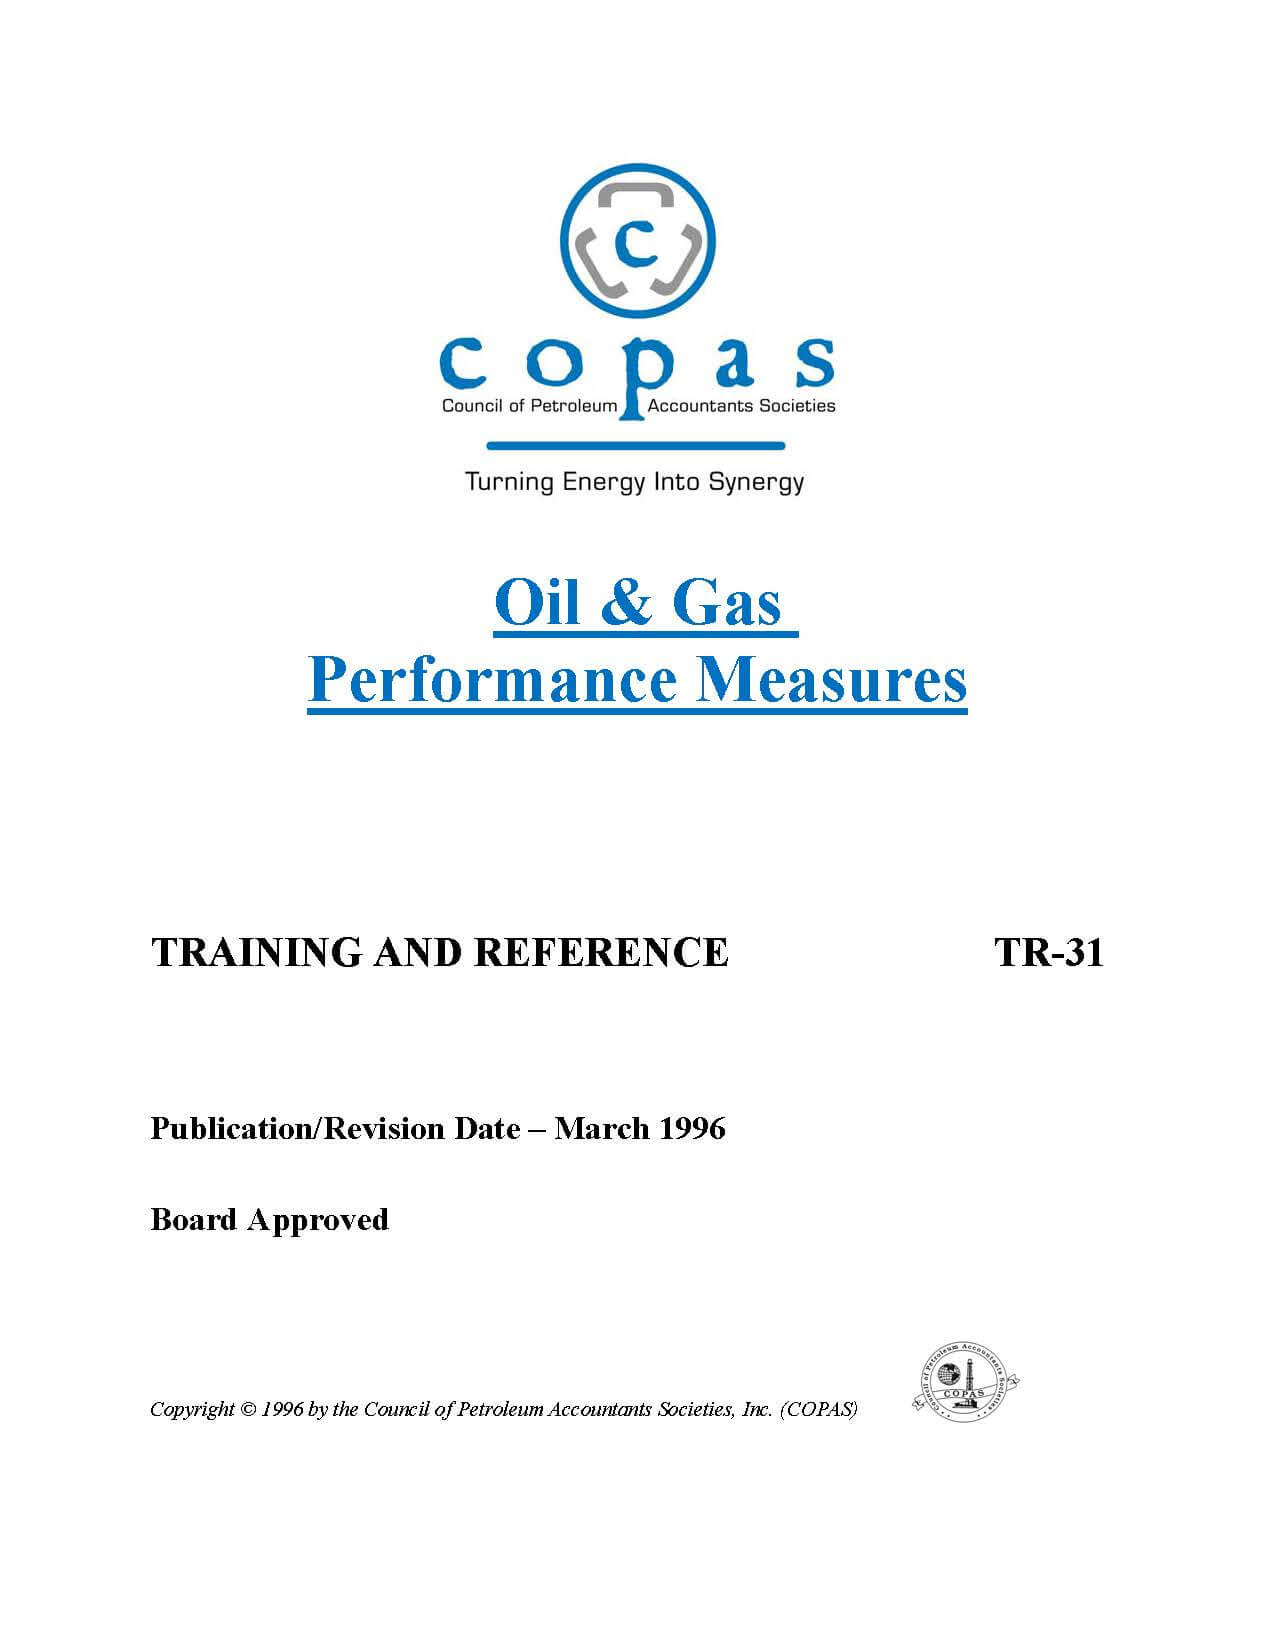 TR-31 Oil & Gas Performance Measures - products TR 31 Oil and Gas Performance Measures - Council of Petroleum Accountants Societies